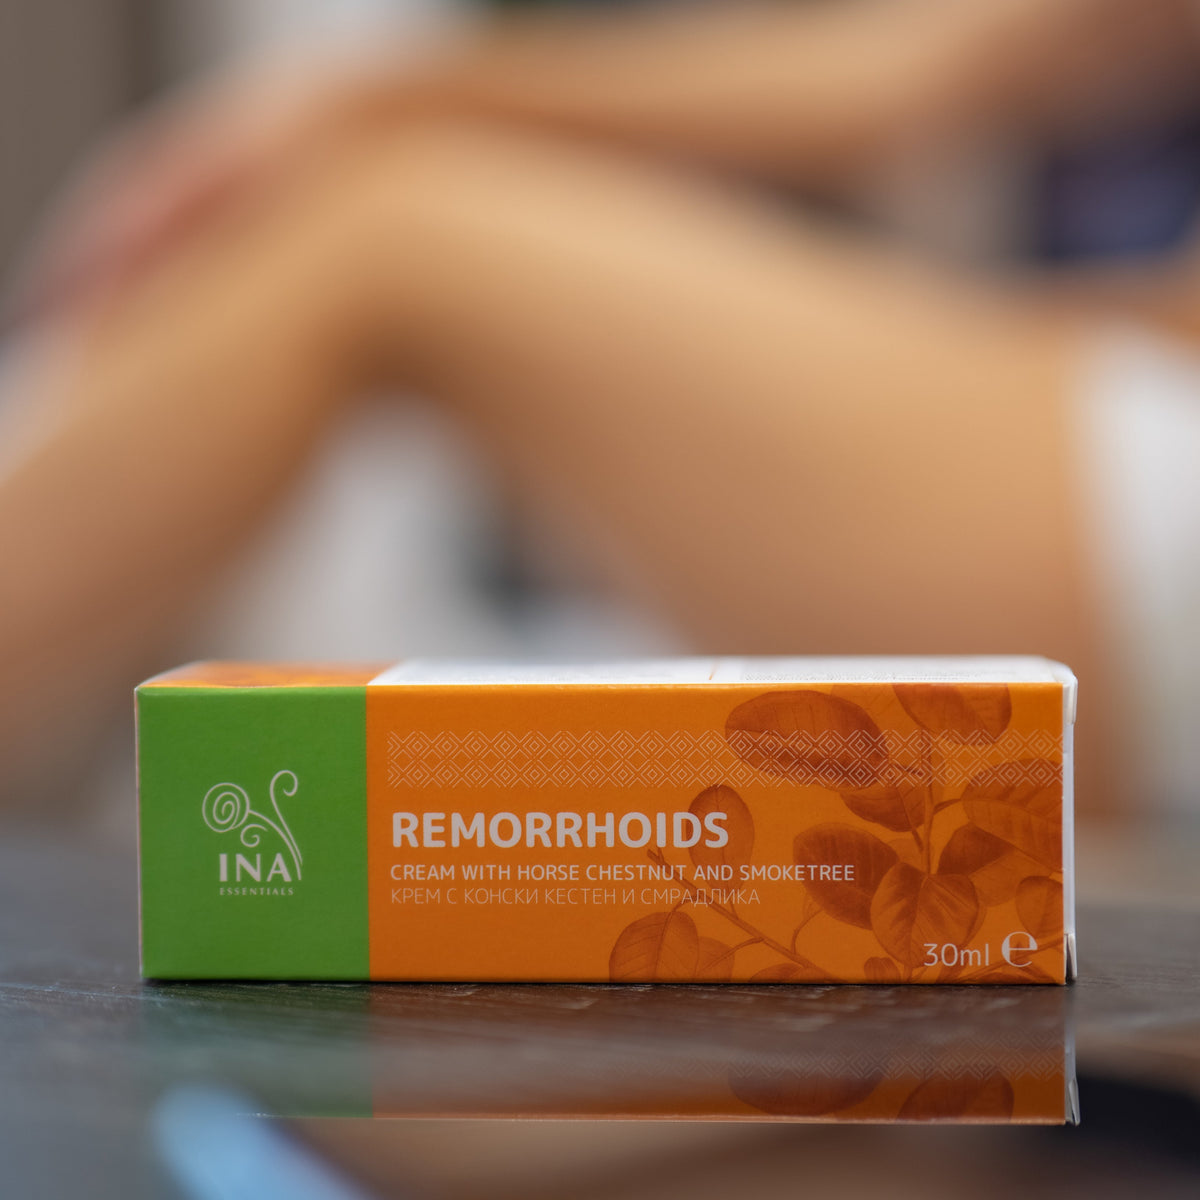 Remorrhoids - cream for Vein Varicose and Hemorrhoids - highly enriched with Smoke Tree and Horse Chestnut